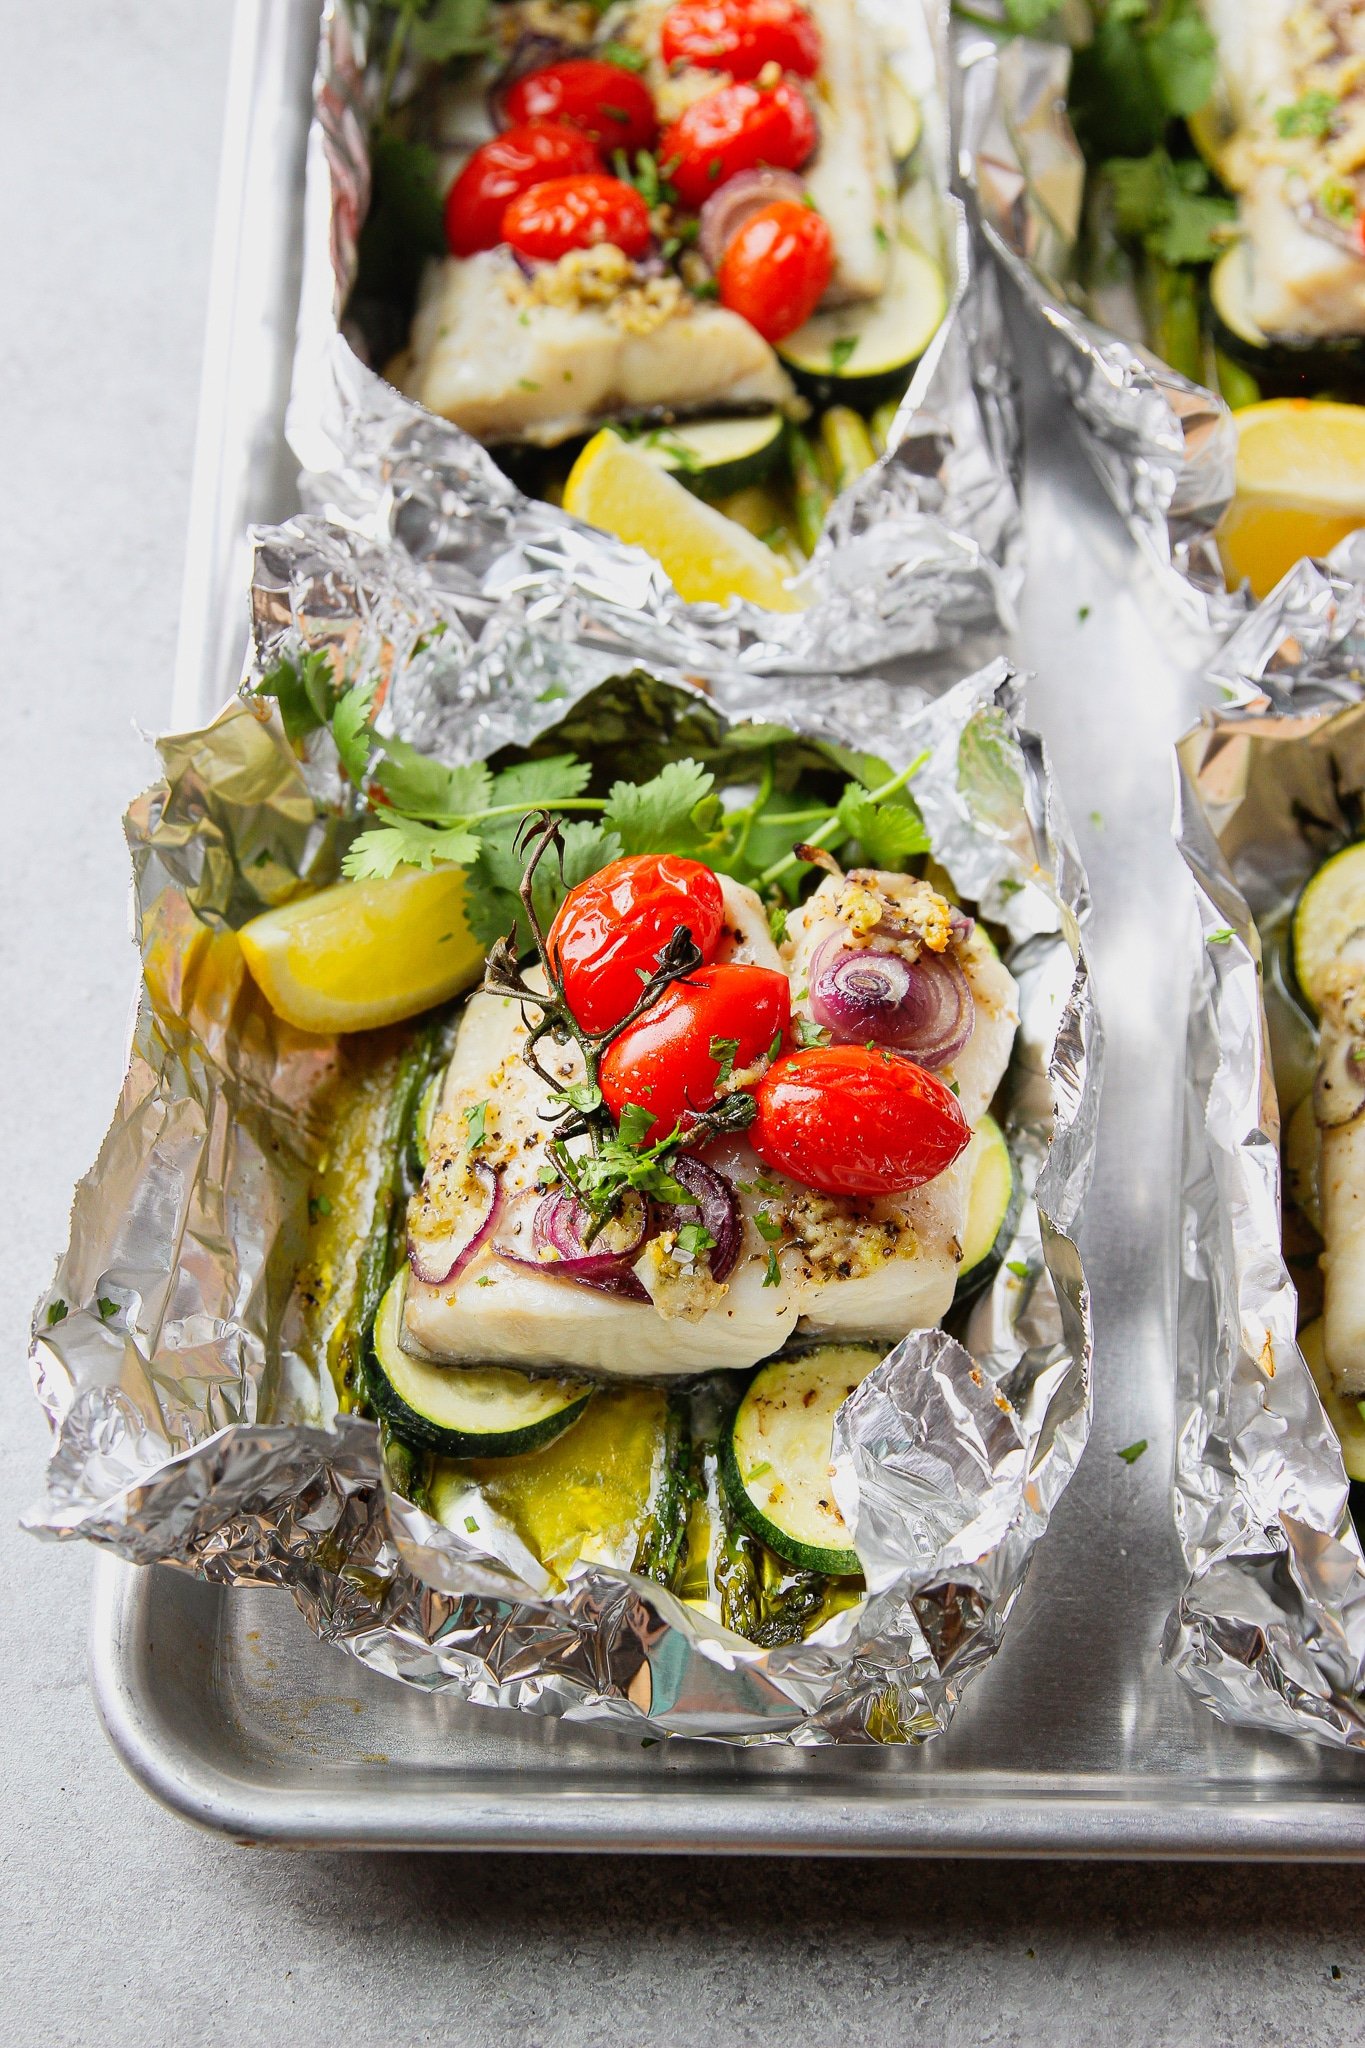 Baked Fish In Foil With Vegetables Garden In The Kitchen